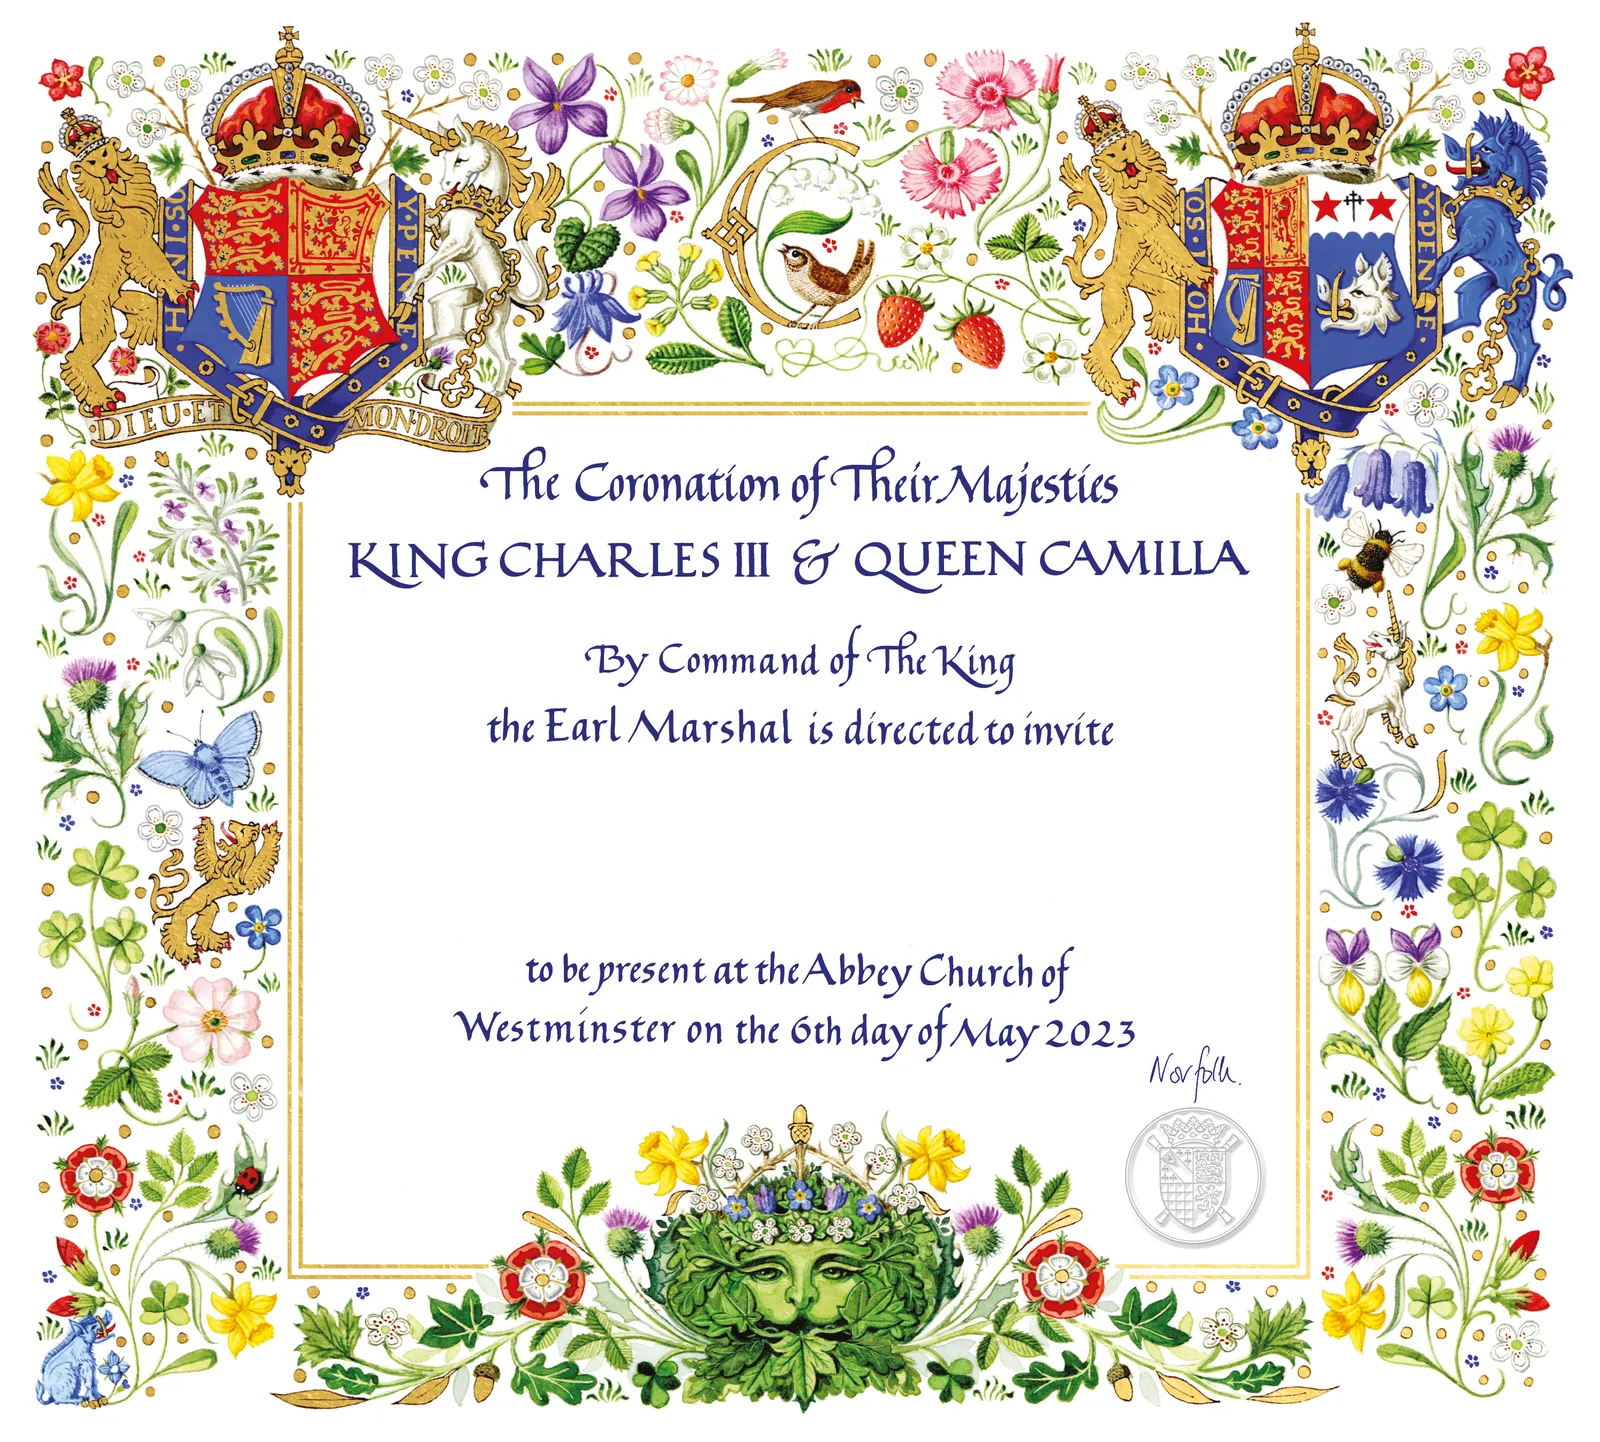 Introducing the King and Queen: Photos and details from the Coronation